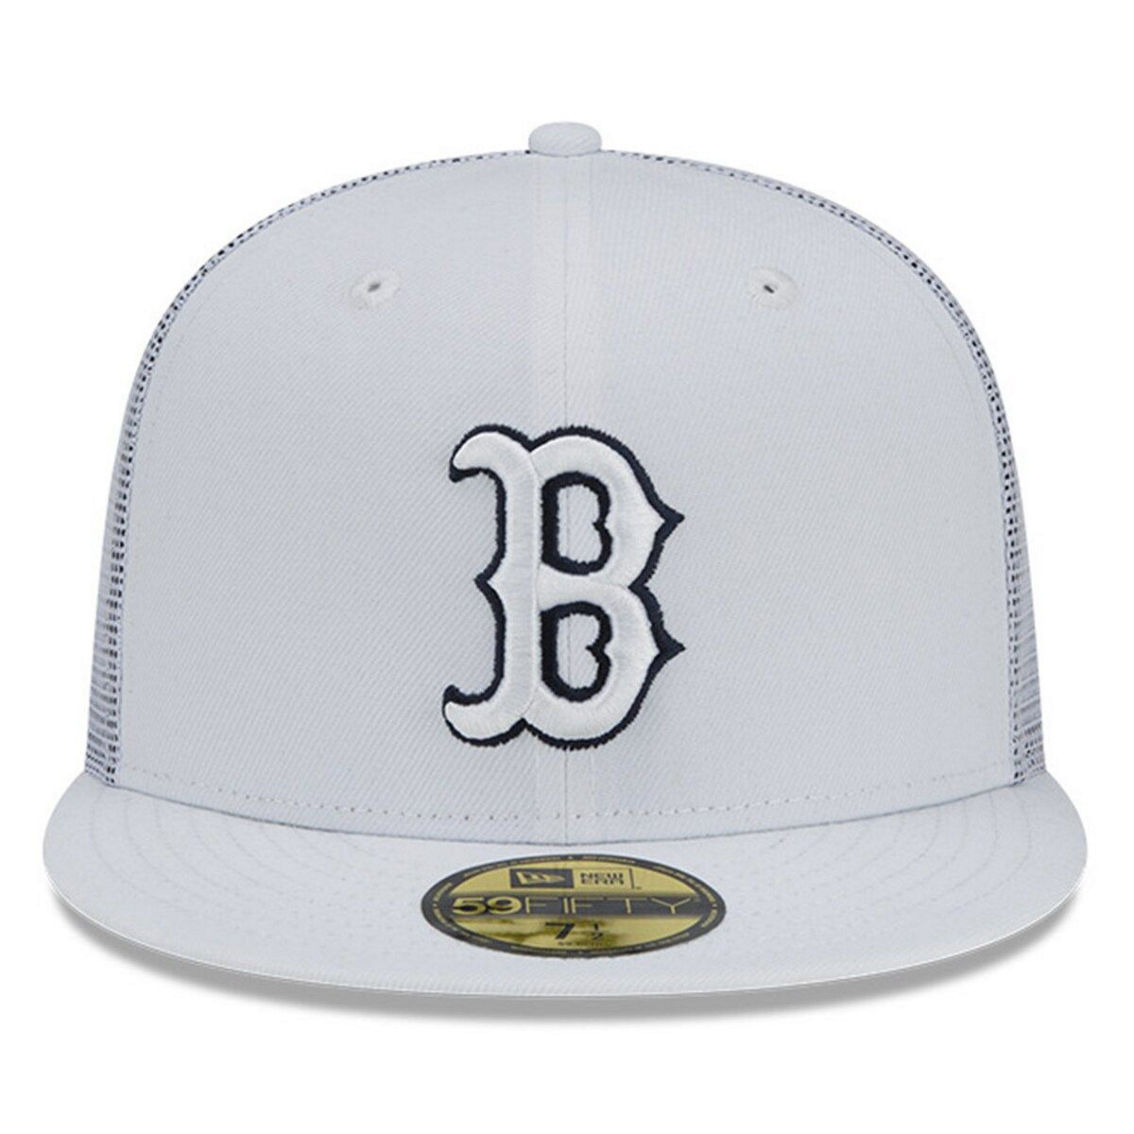 New Era Men's White Boston Red Sox 2022 Batting Practice 59FIFTY Fitted Hat - Image 3 of 4